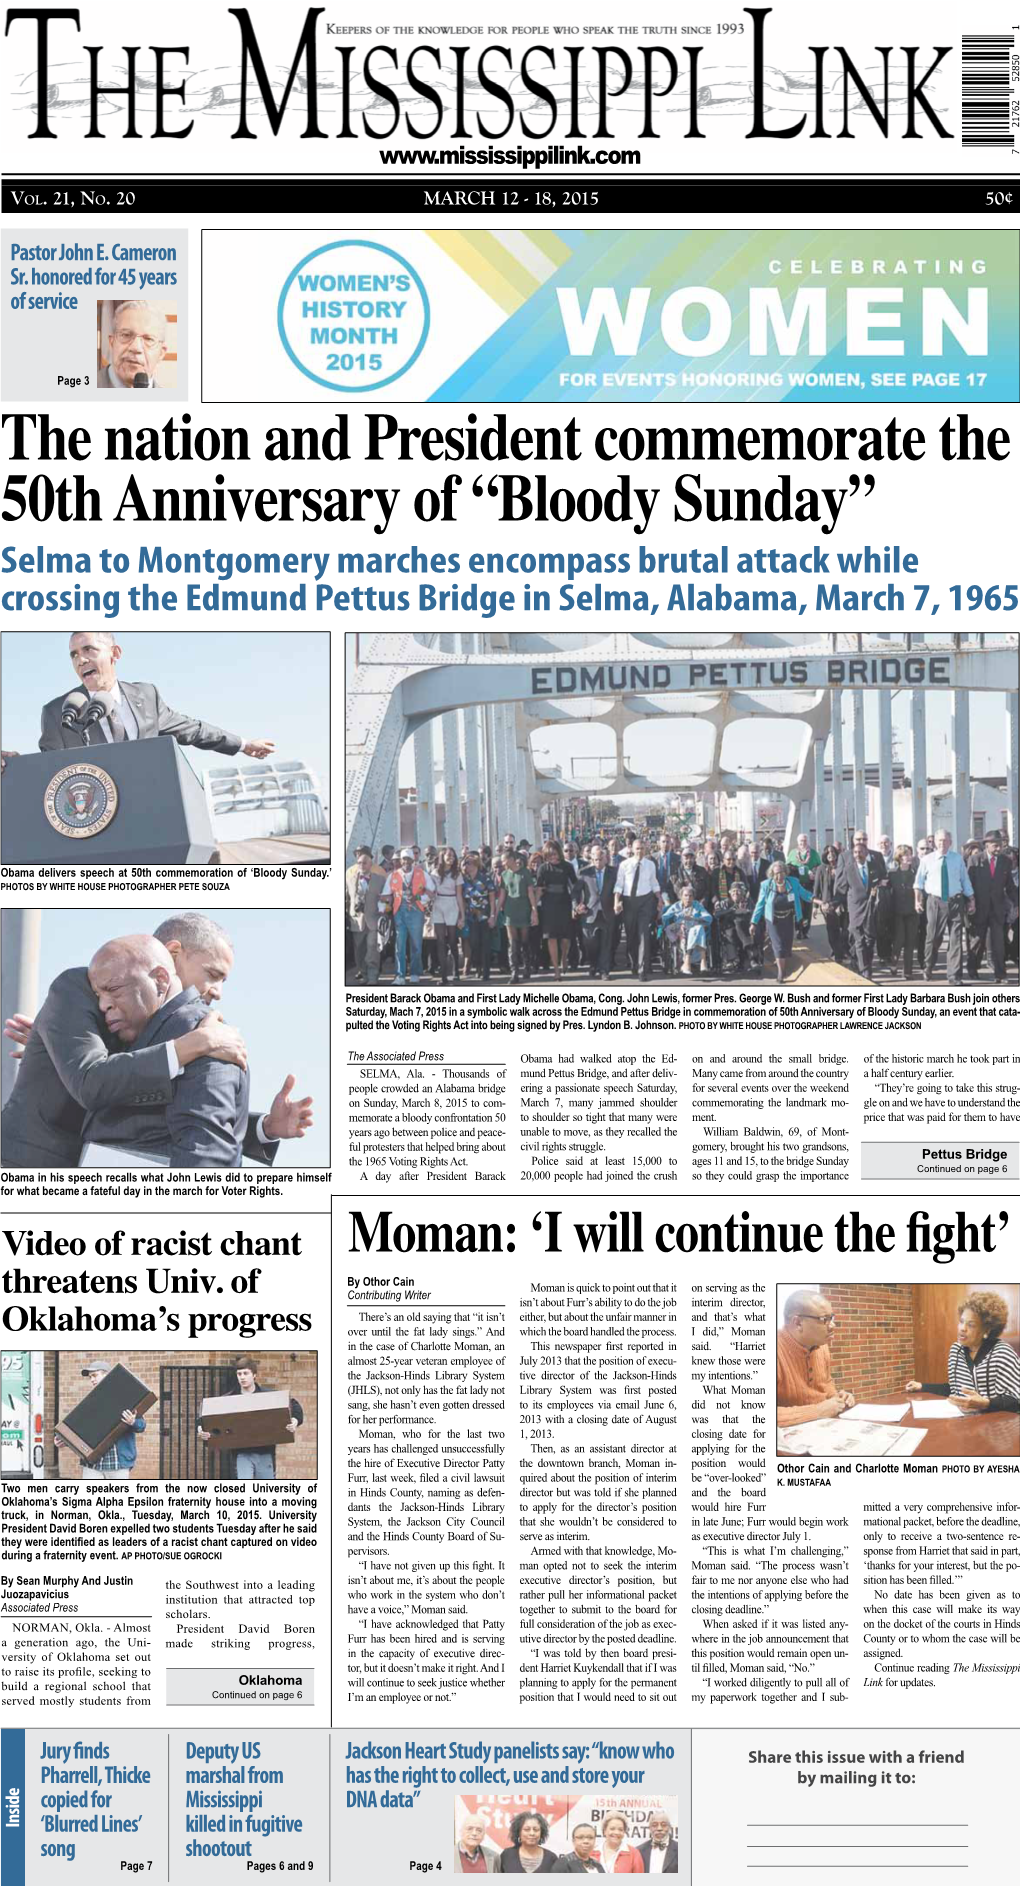 Bloody Sunday” Selma to Montgomery Marches Encompass Brutal Attack While Crossing the Edmund Pettus Bridge in Selma, Alabama, March 7, 1965